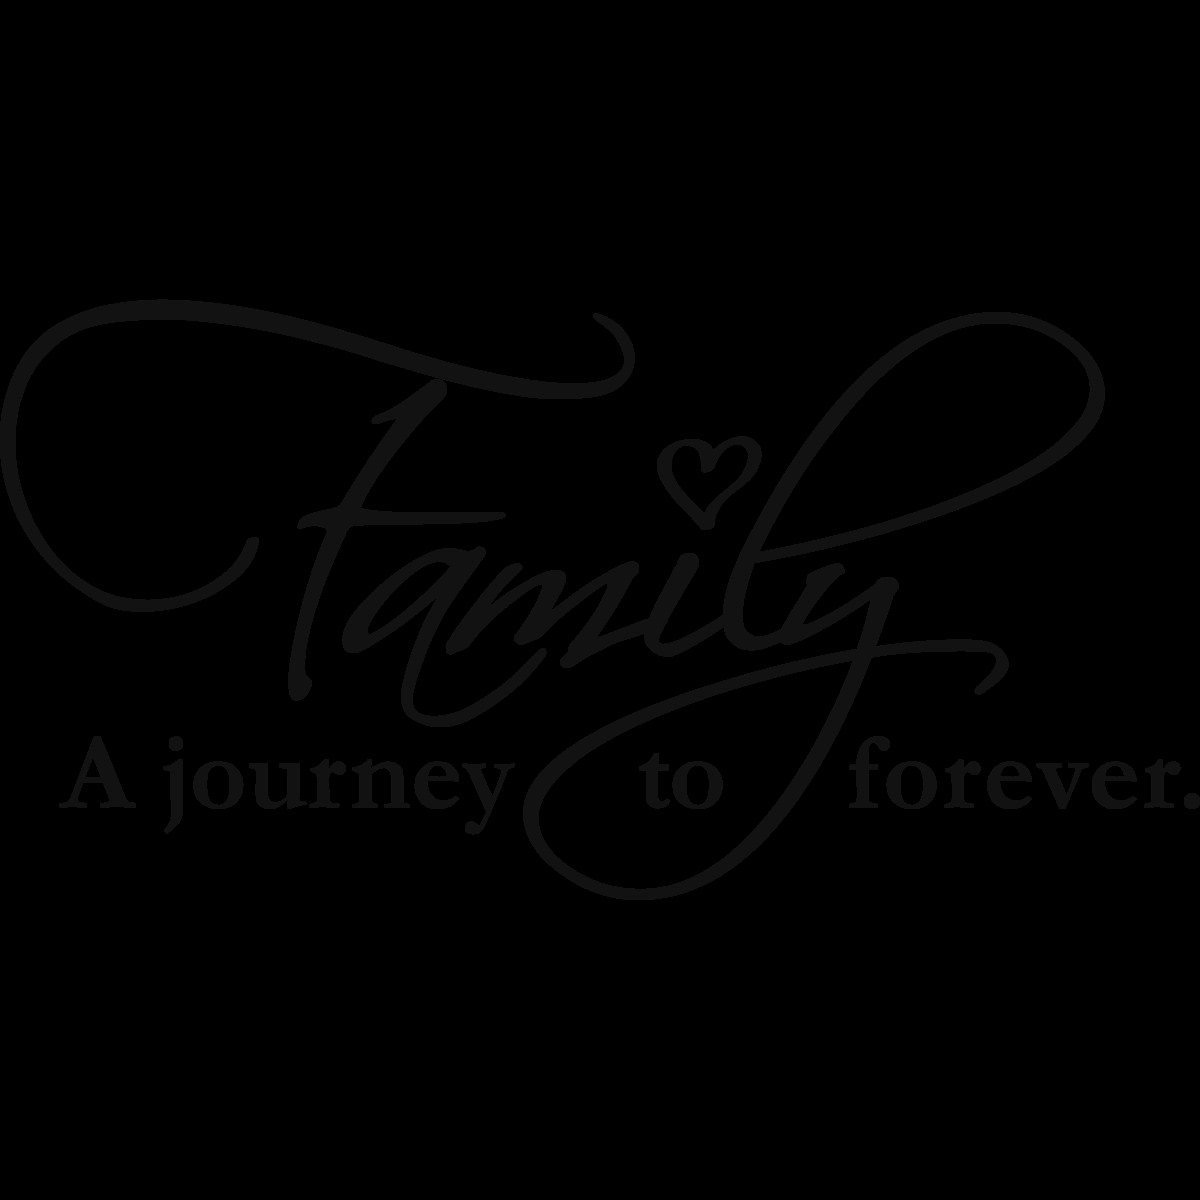 Family Forever Quote
 Stickers muraux citations Sticker Family forever